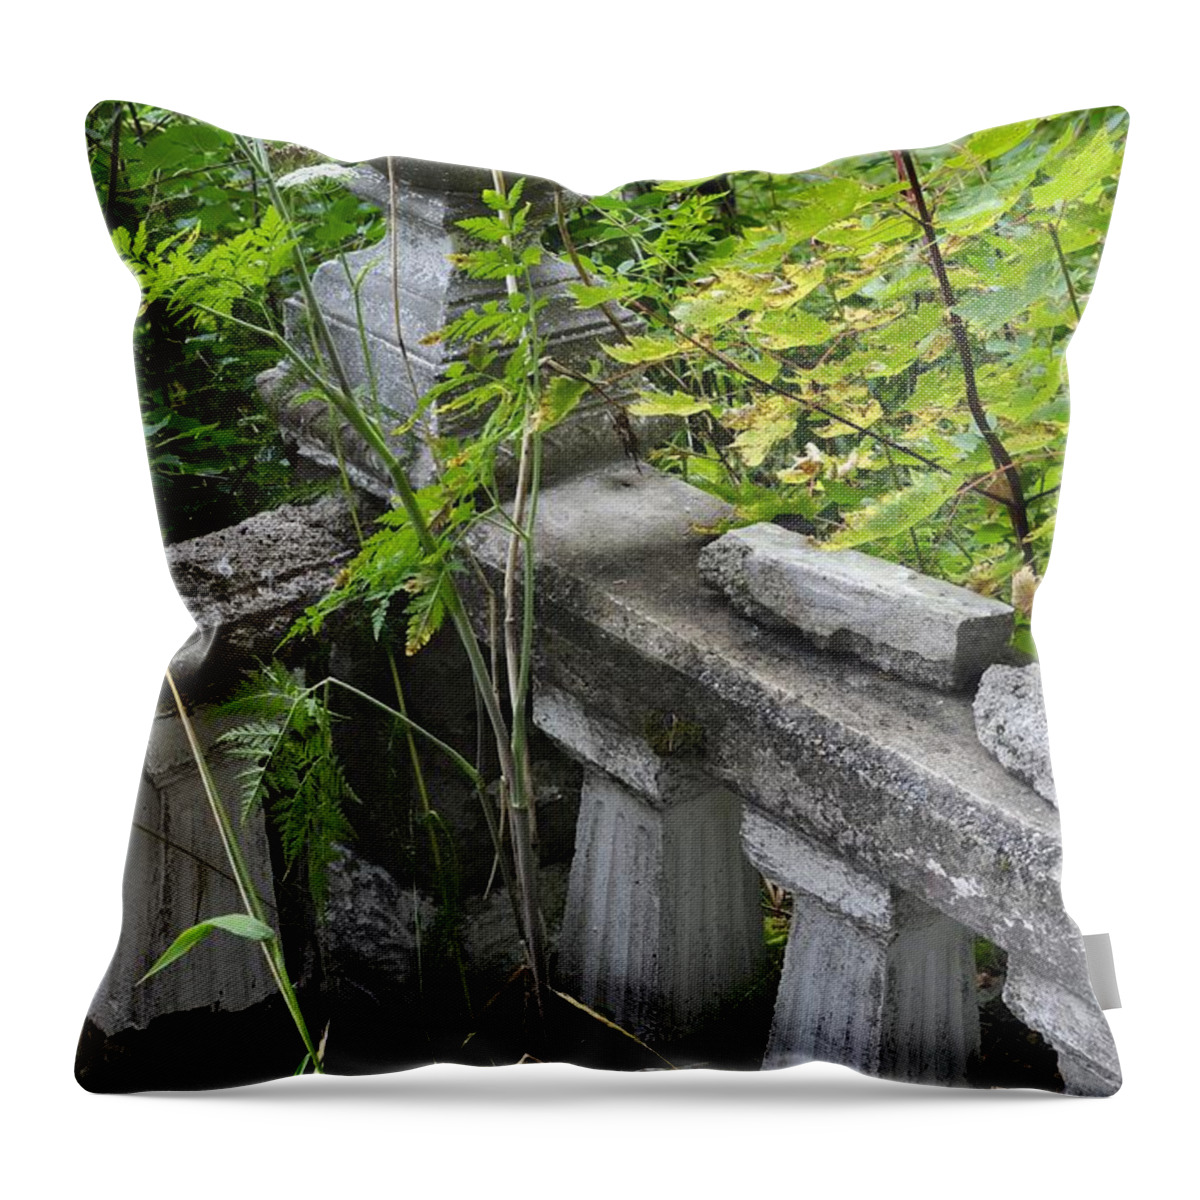 Abandoned Throw Pillow featuring the photograph Abandoned Cemetery by Cathy Mahnke